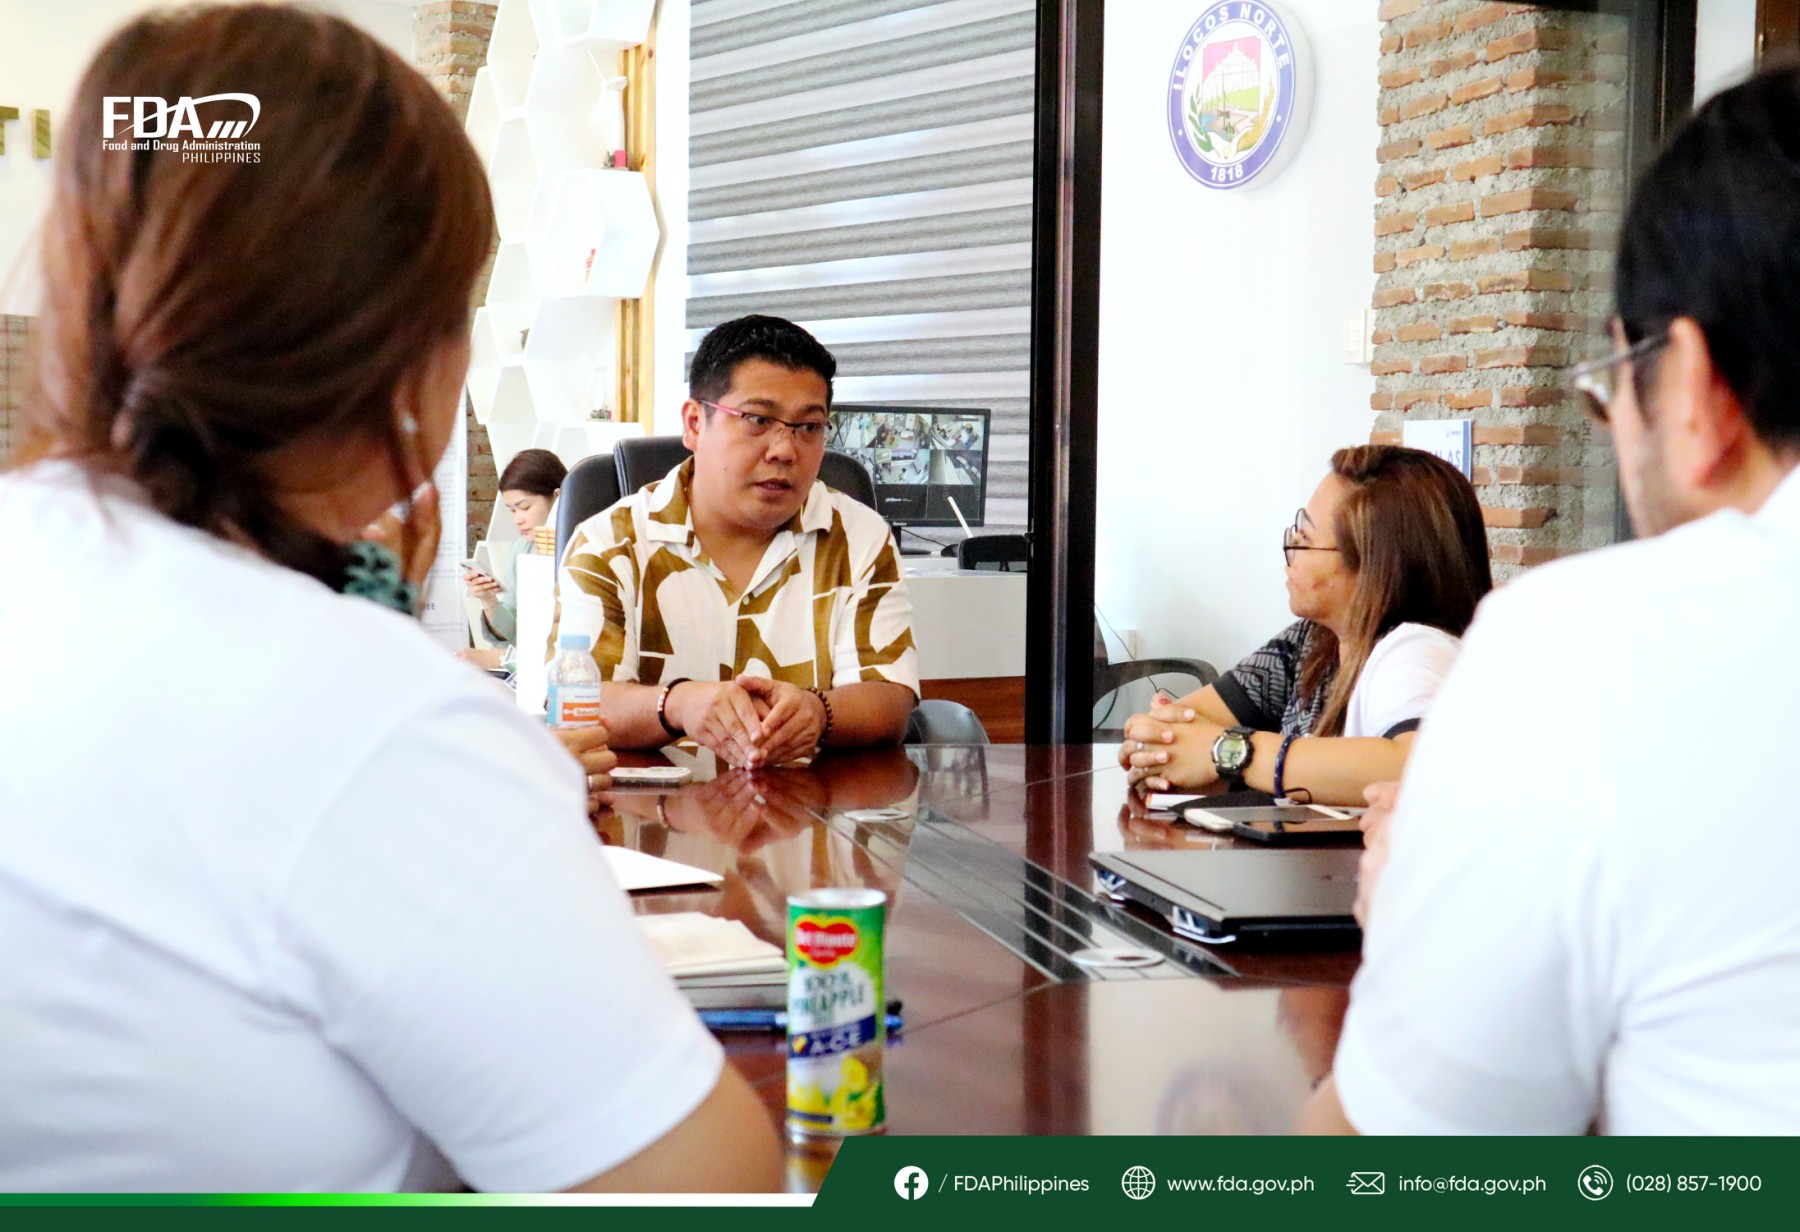 Featured Activity || On 25 April 2023, The Food and Drug Administration (FDA), led by Director General Samuel A. Zacate, visited the Provincial Government of La Tabacalera, Laoag City, Ilocos Norte Micro, Small, and Medium Enterprises (MSME) Incubation Center. This Provincial Government project for MSMEs is a program initiated by Governor Matthew J. Marcos Manotoc to support growth aligned to the innovative and sustainable growth and development of entrepreneurship in the province.